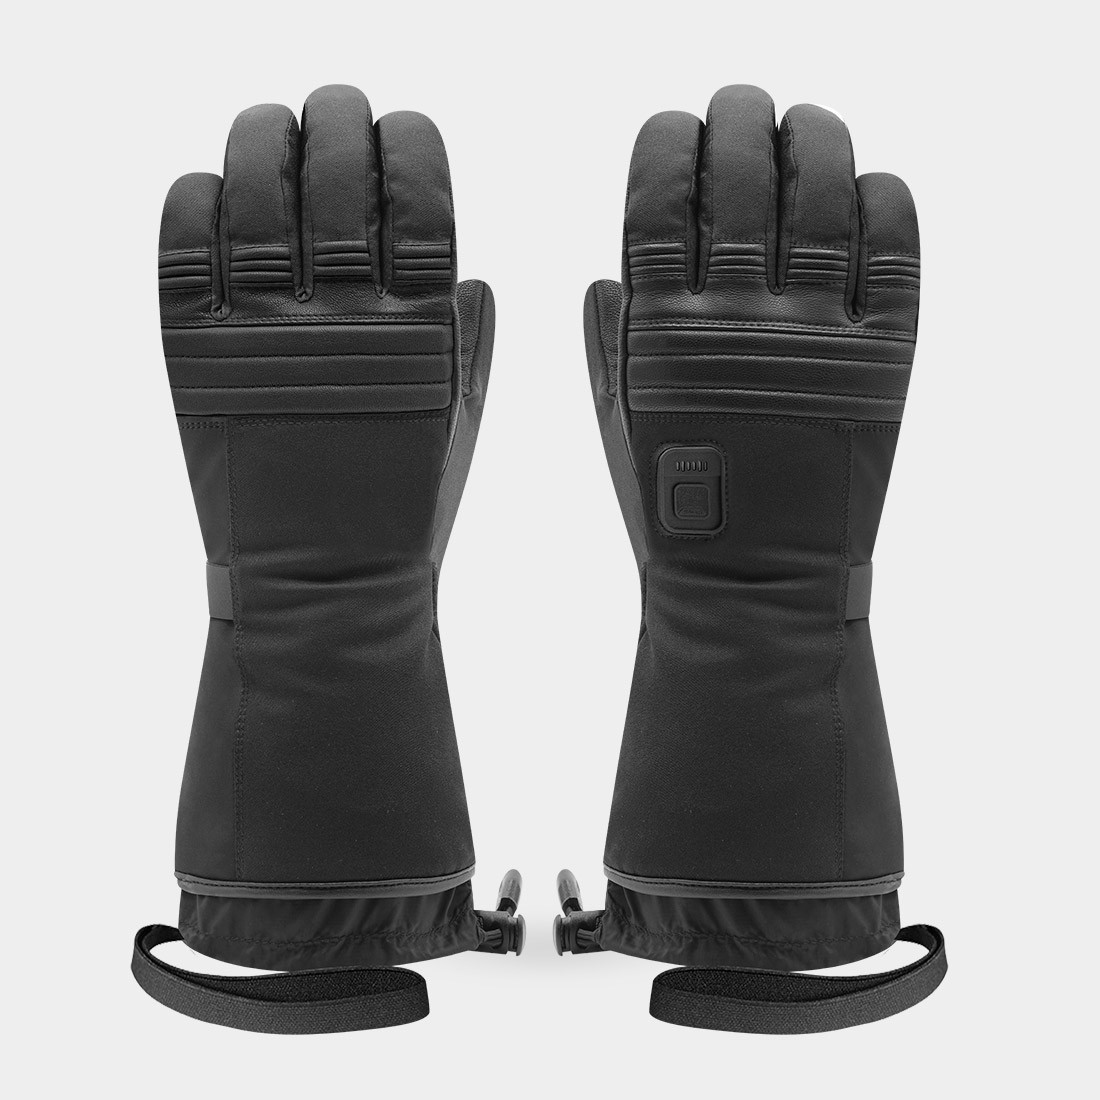 connectic-5-heated-gloves-3